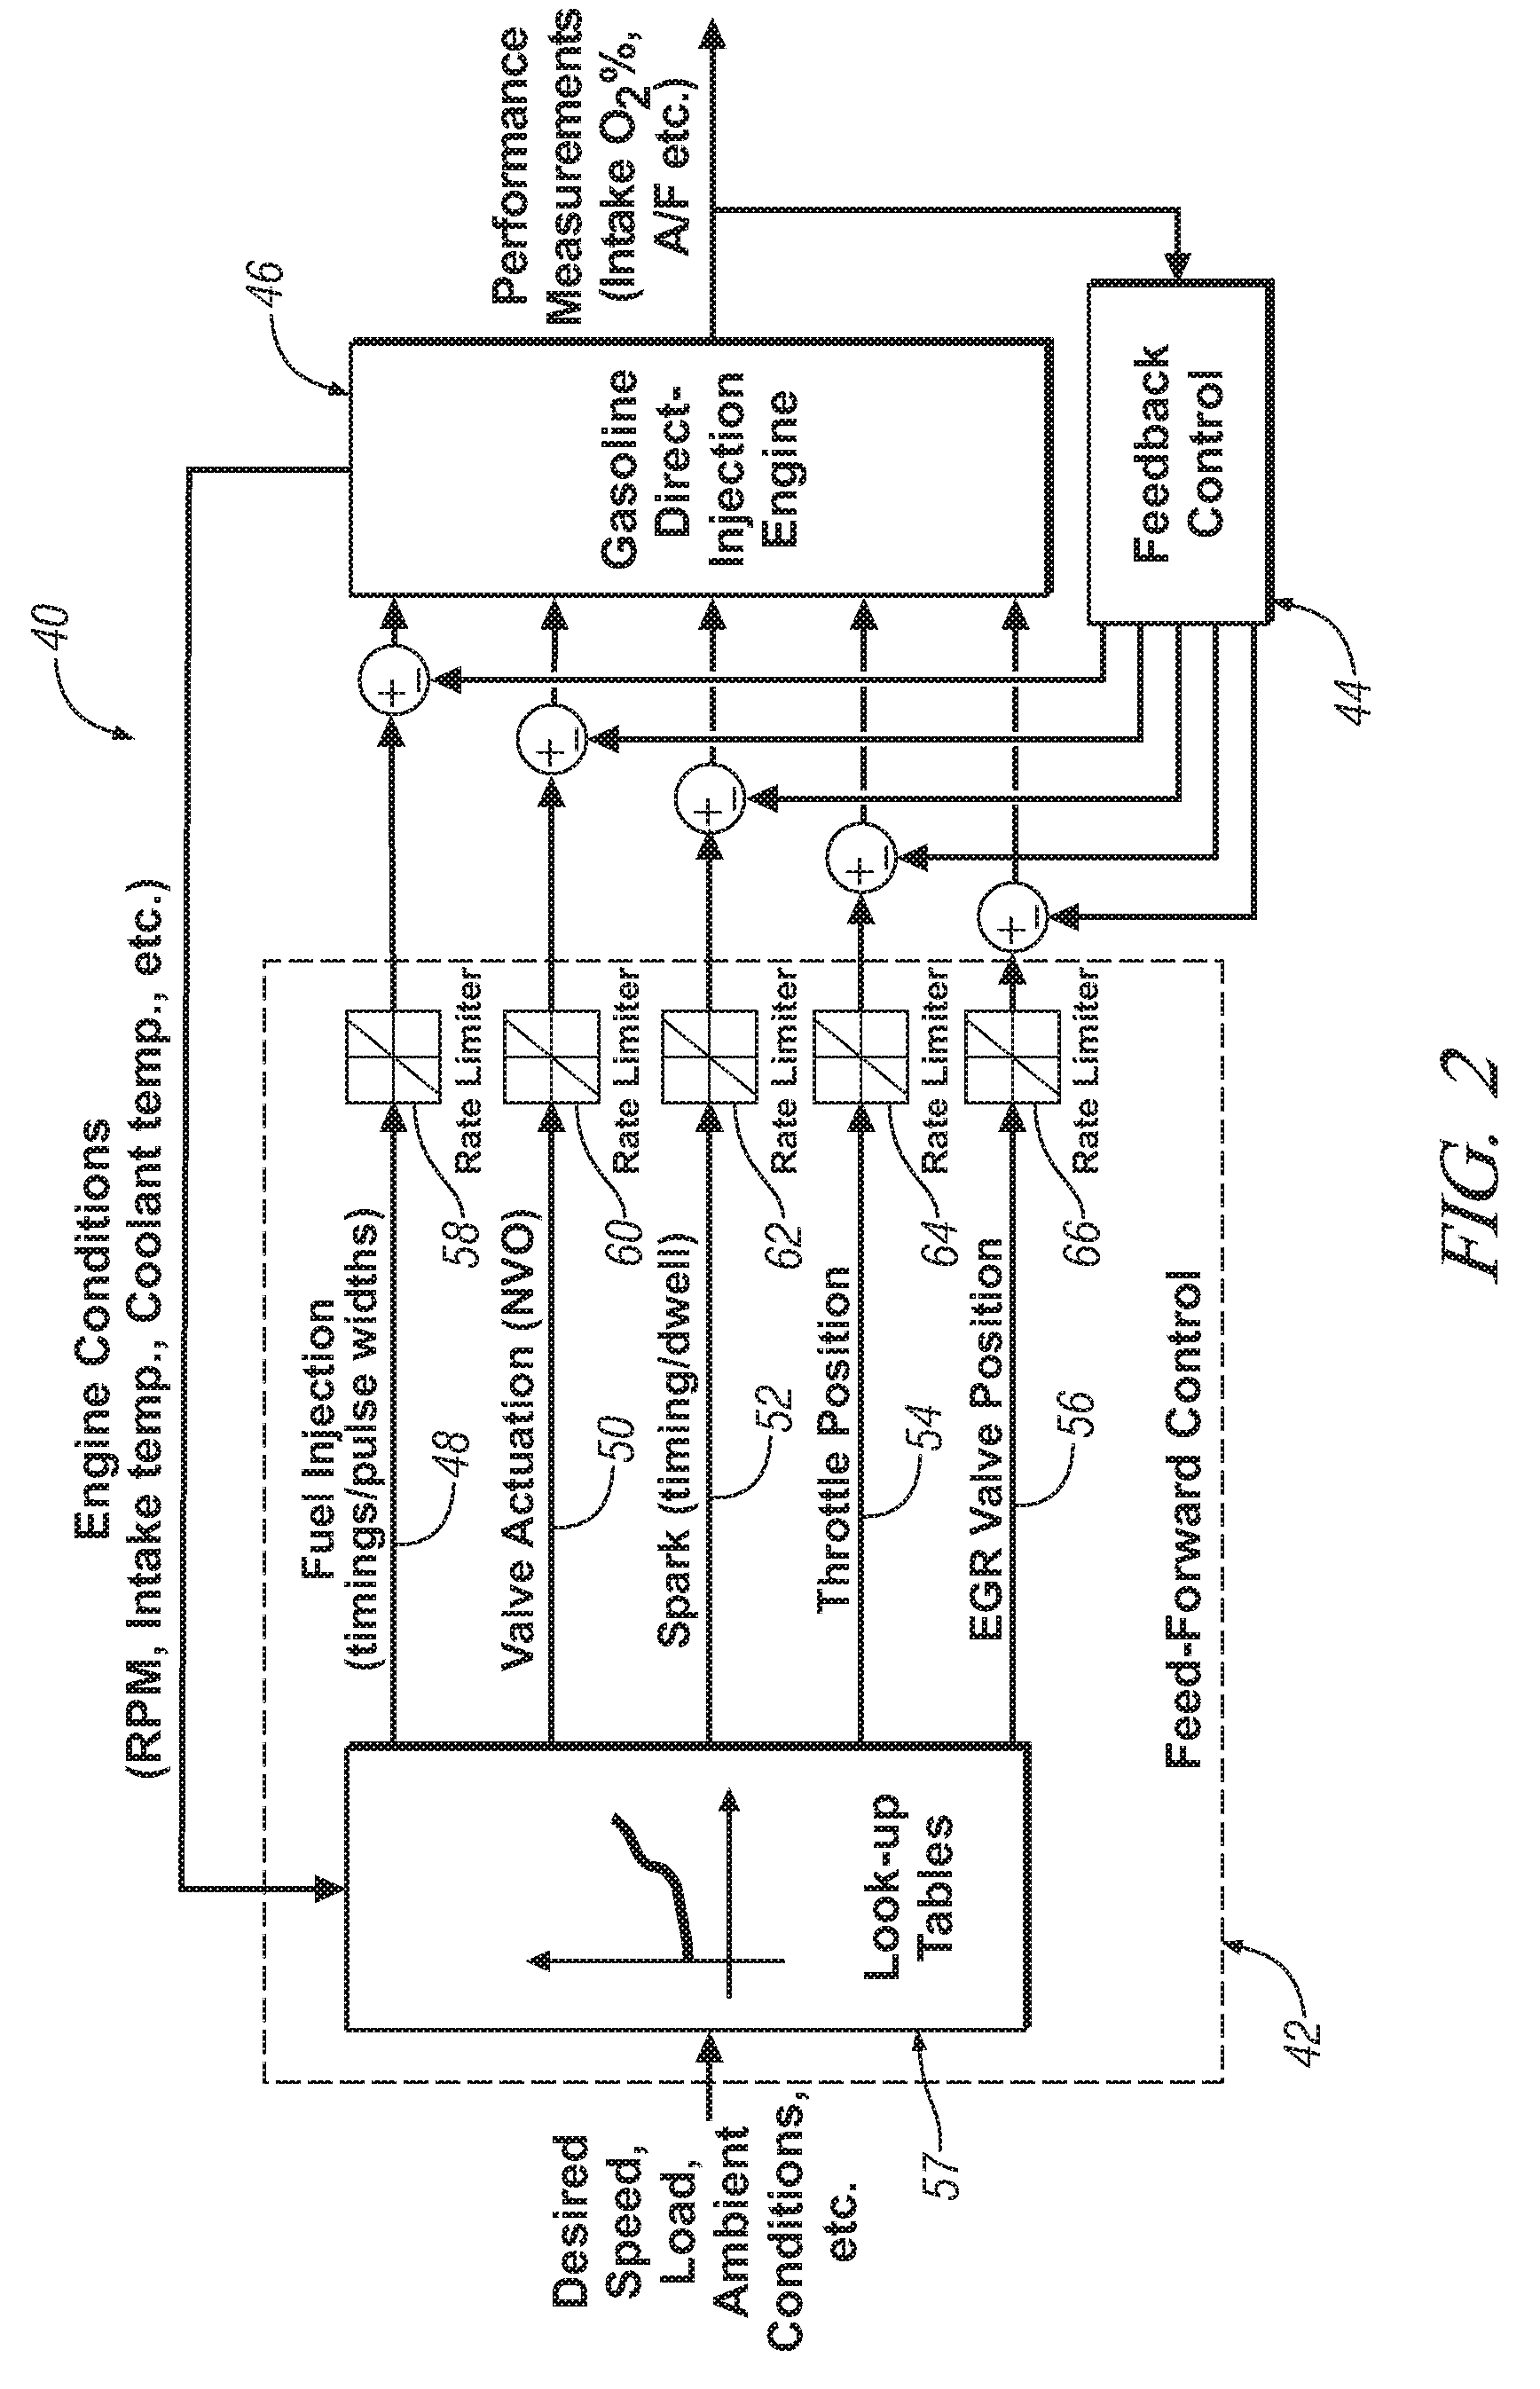 Homogeneous charge compression ignition engine operation